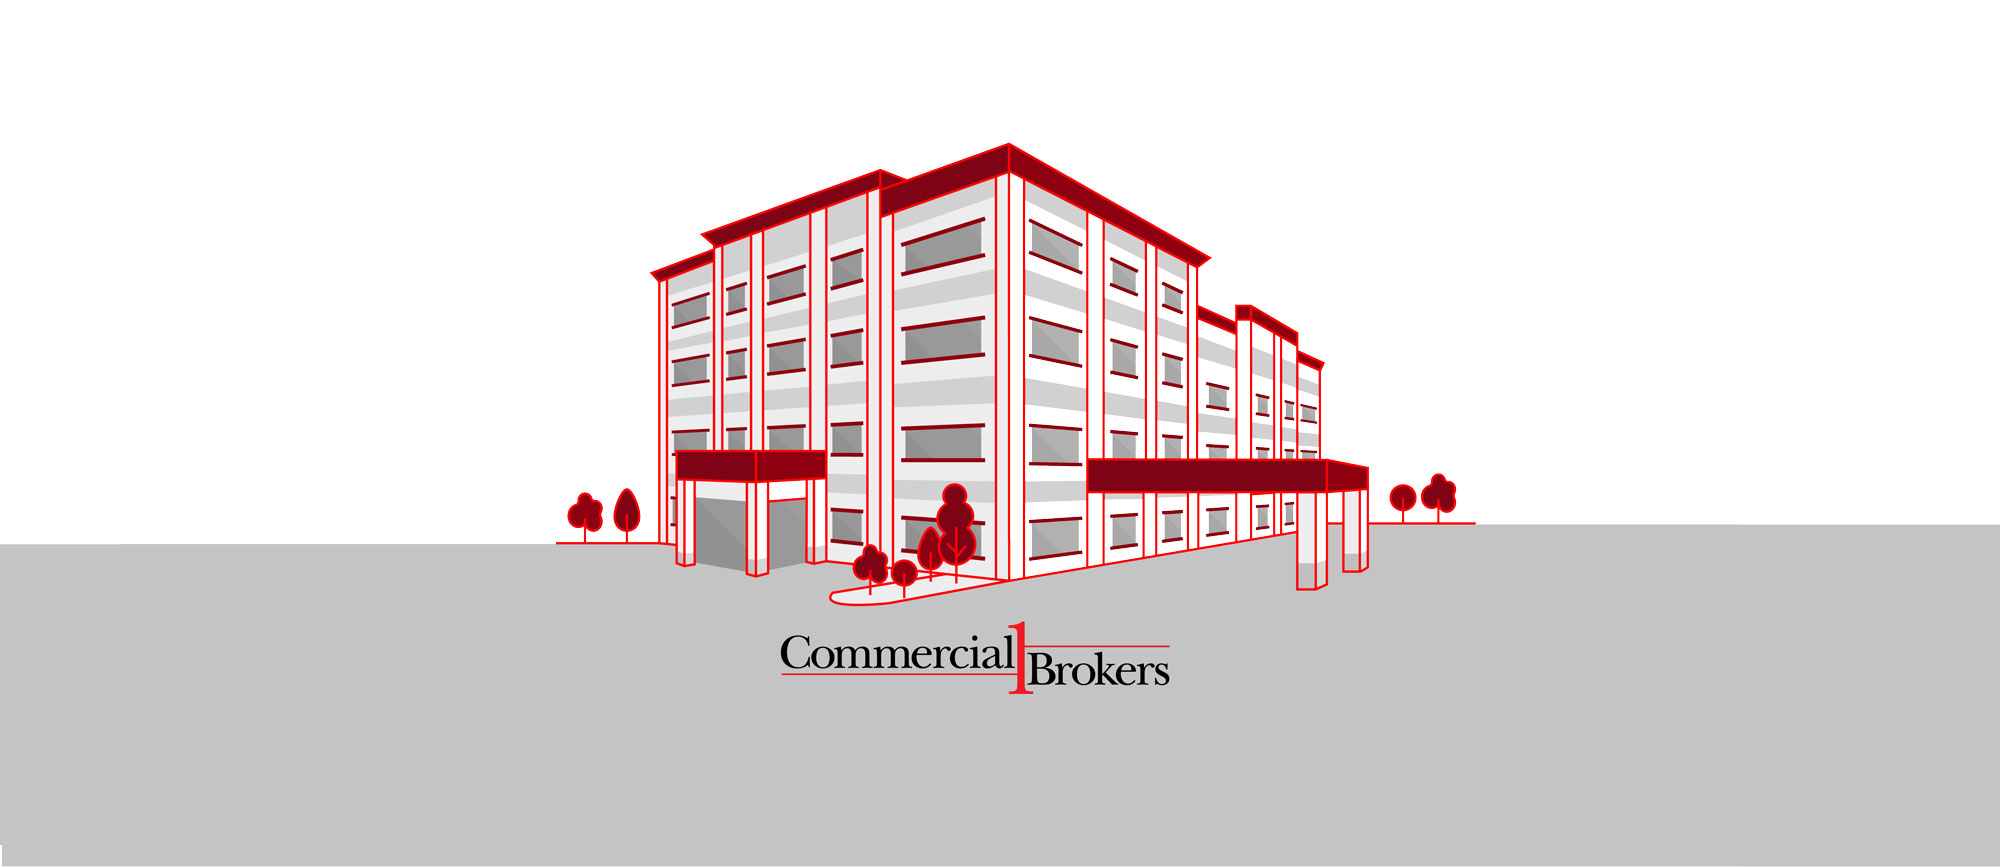 illustration of Commercial 1 Brokers Branson, Mo location